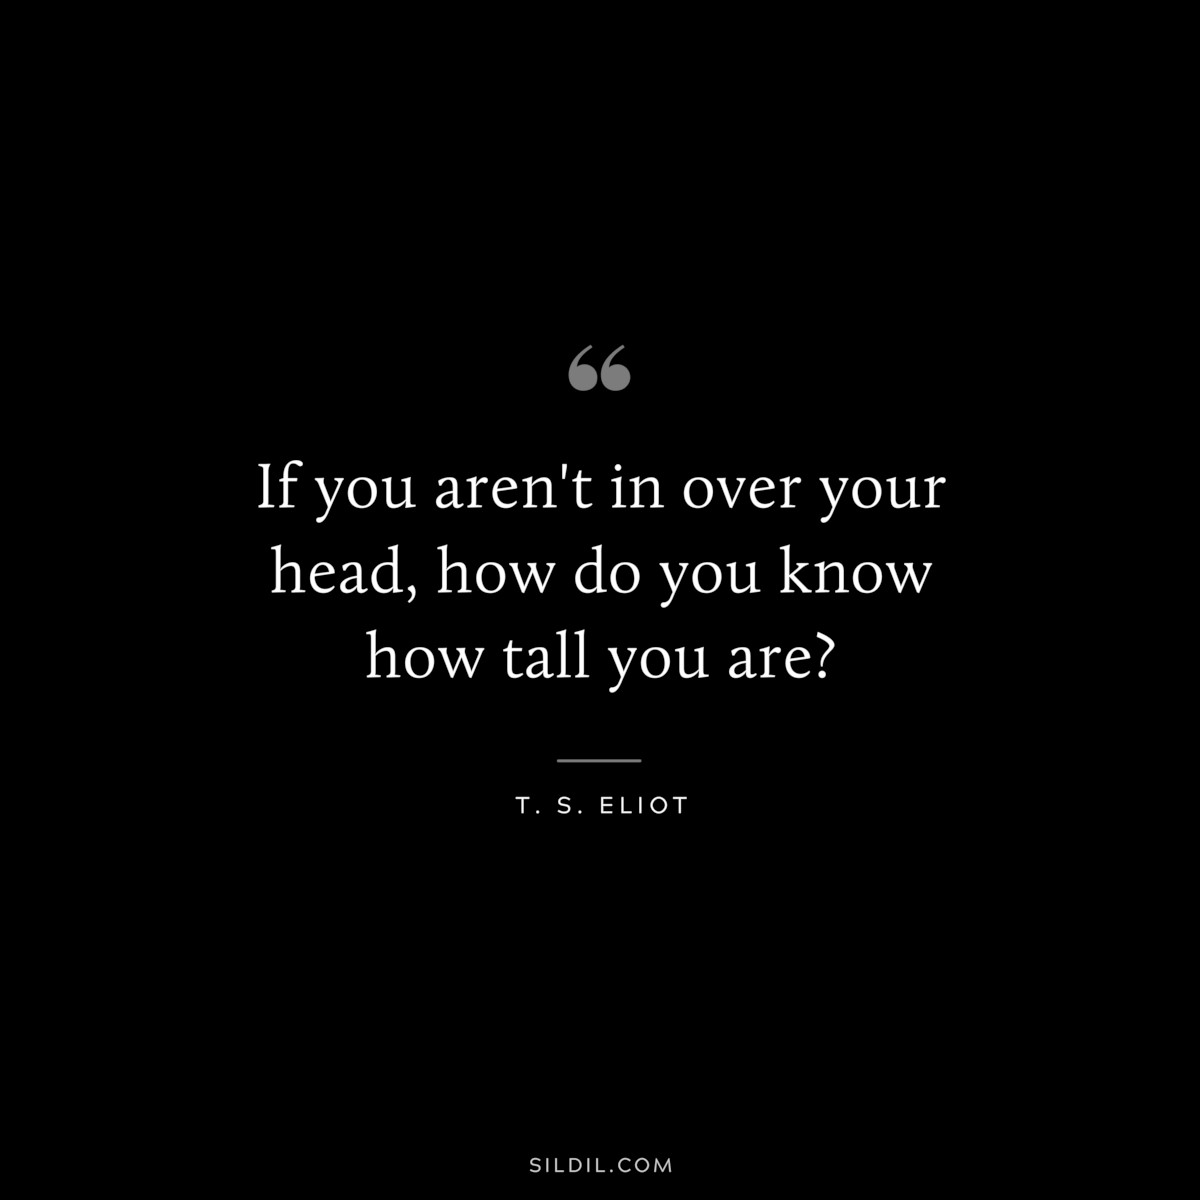 If you aren't in over your head, how do you know how tall you are? ― T. S. Eliot